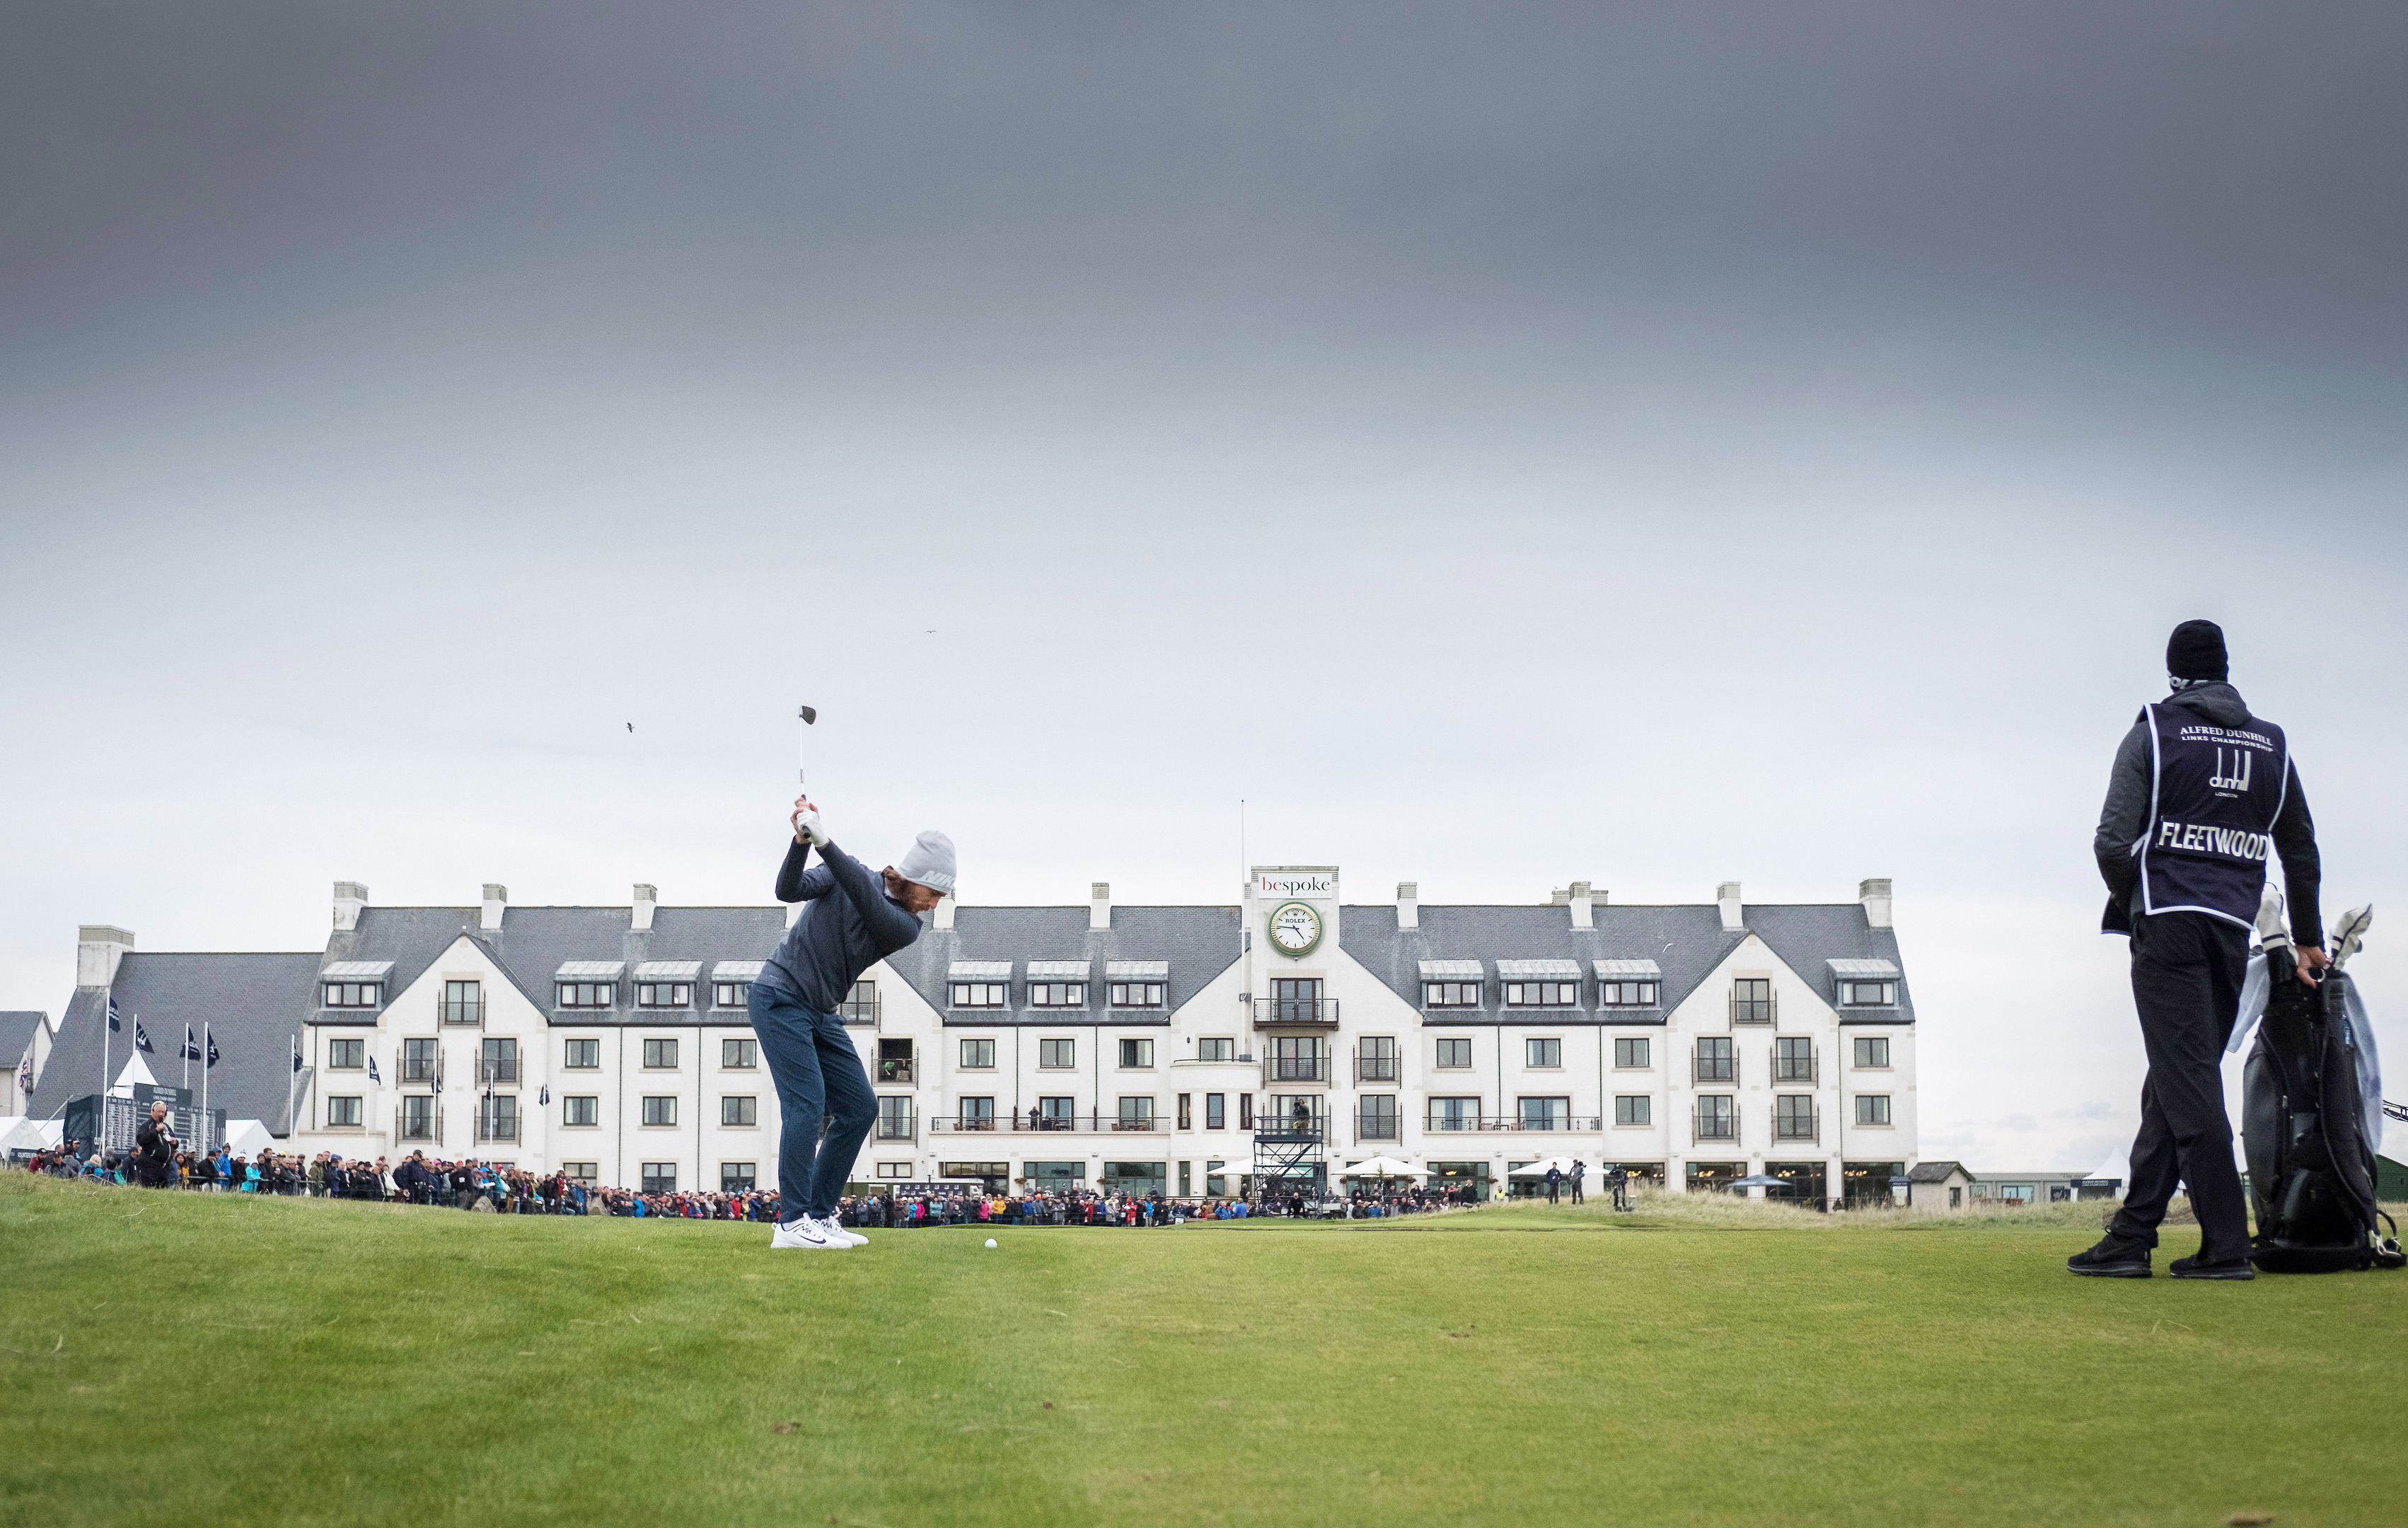 Tommy Fleetwood plays his approach into the 18th hole at Carnoustie during yesterday's record 63.